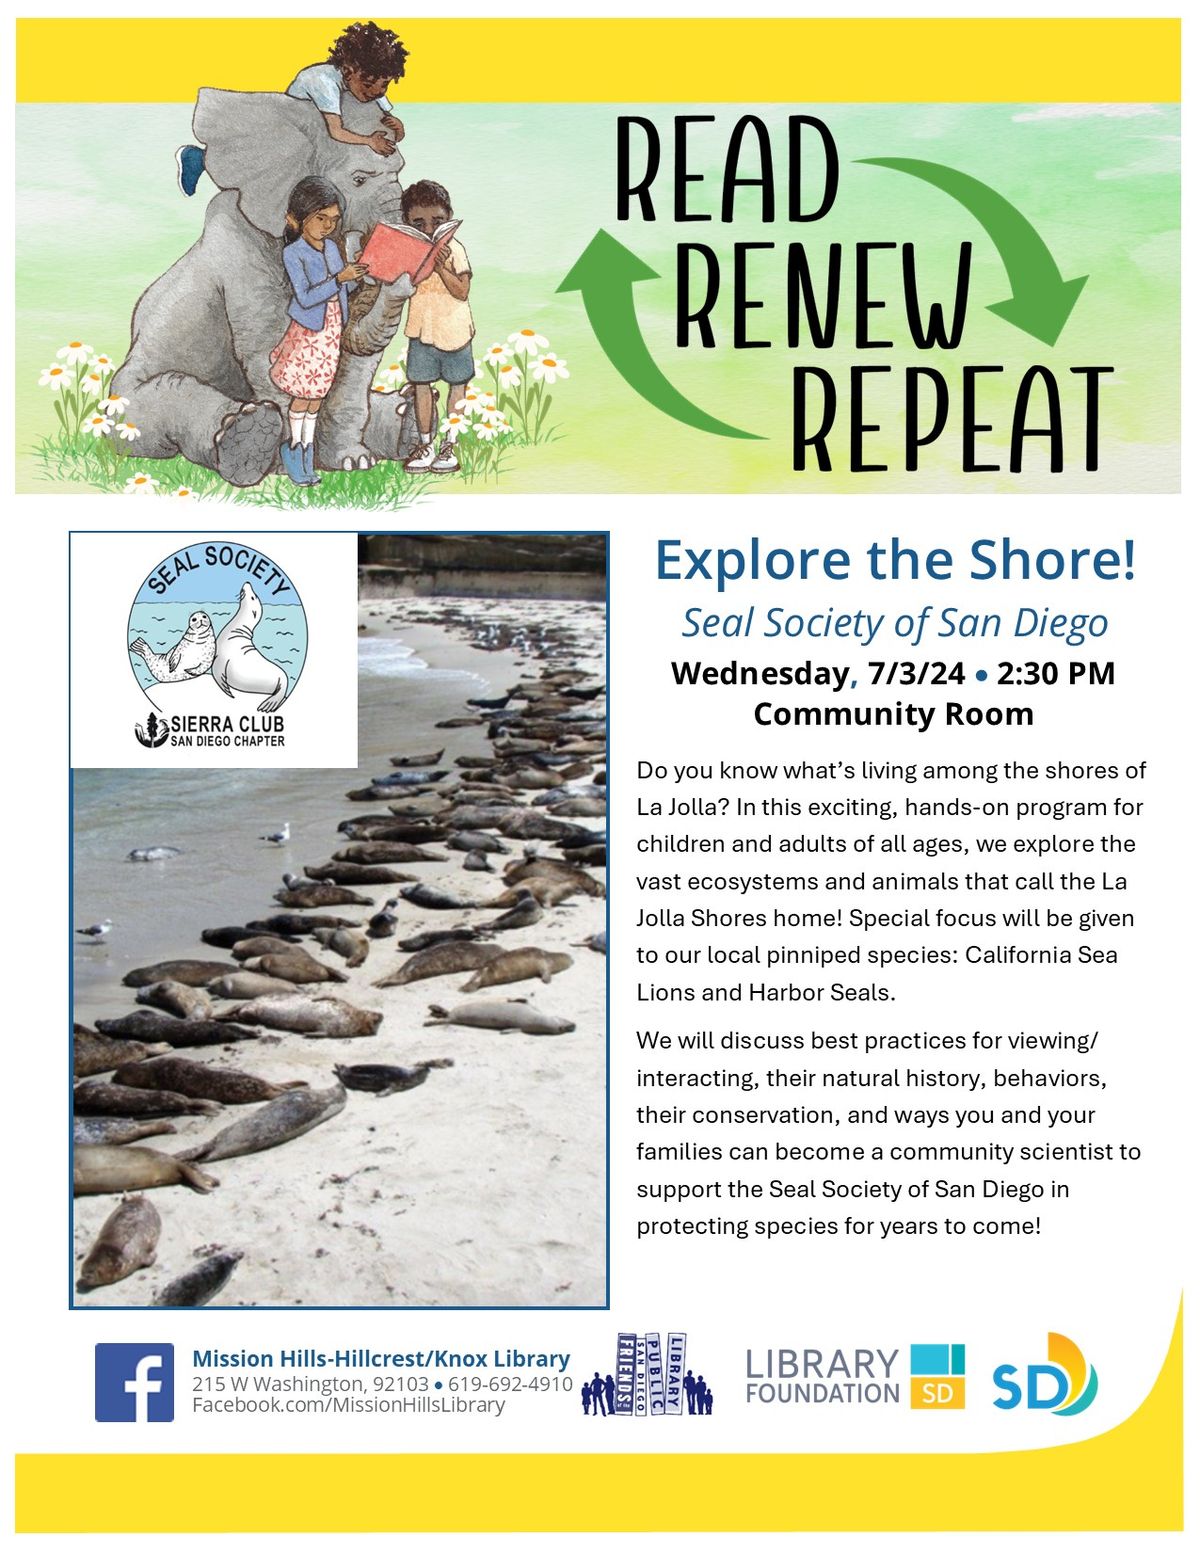 Explore the Shore! Seal Society of San Diego